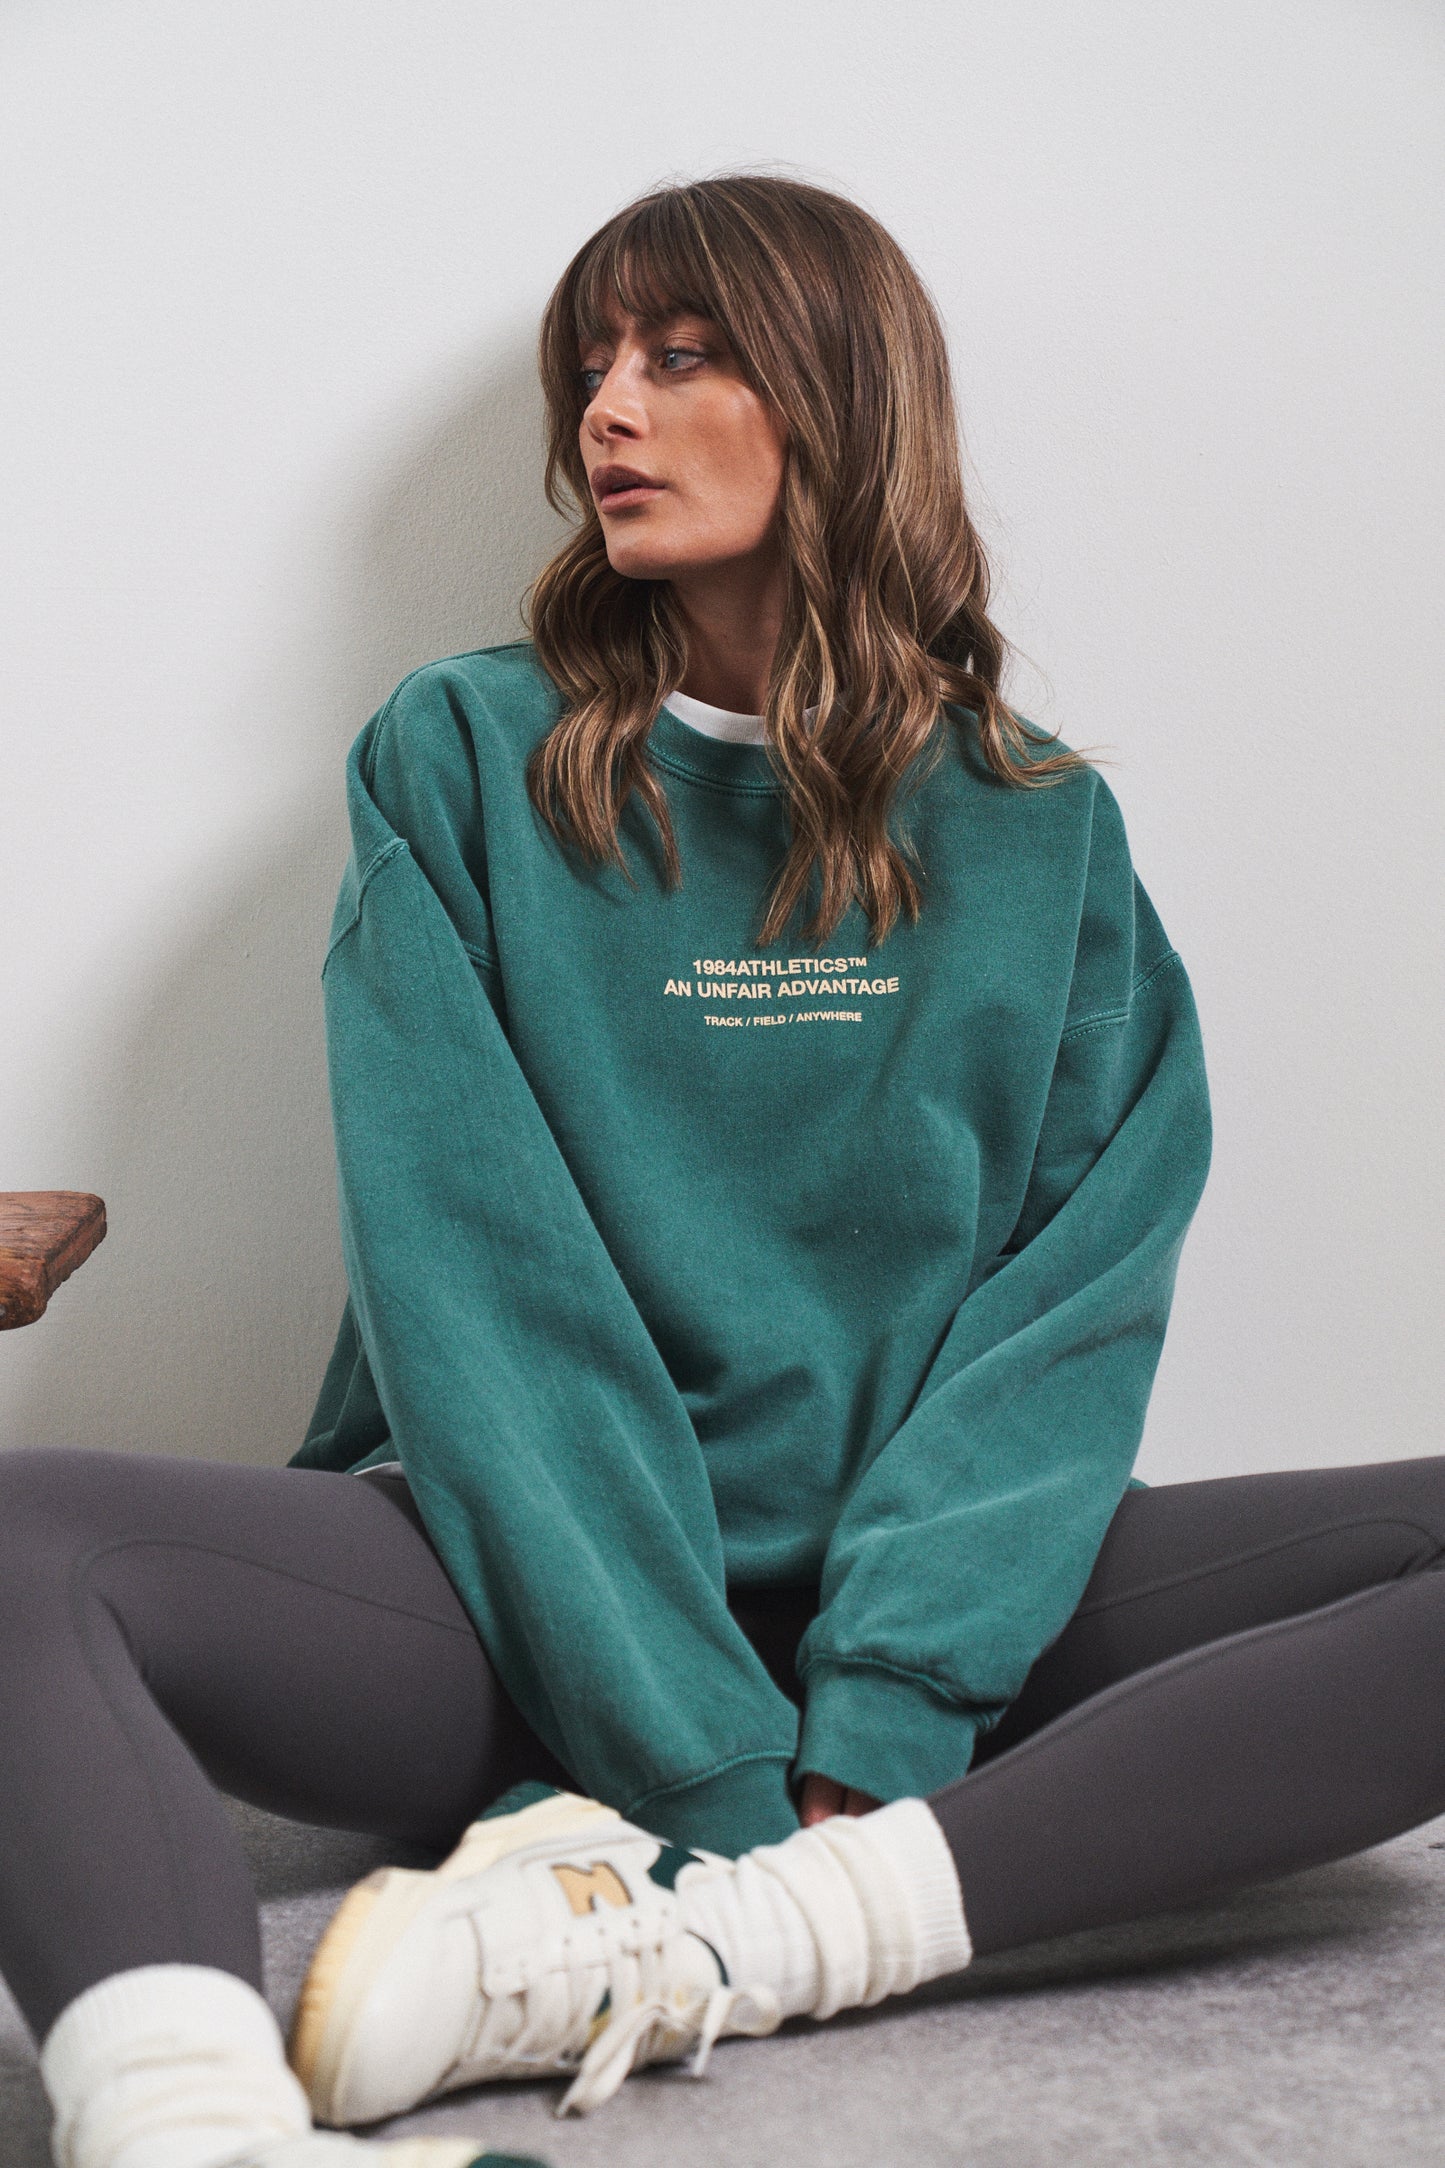 Vice 84 'Athletics' Vintage Washed Sweater Twinpack - Emerald Green/Chocolate